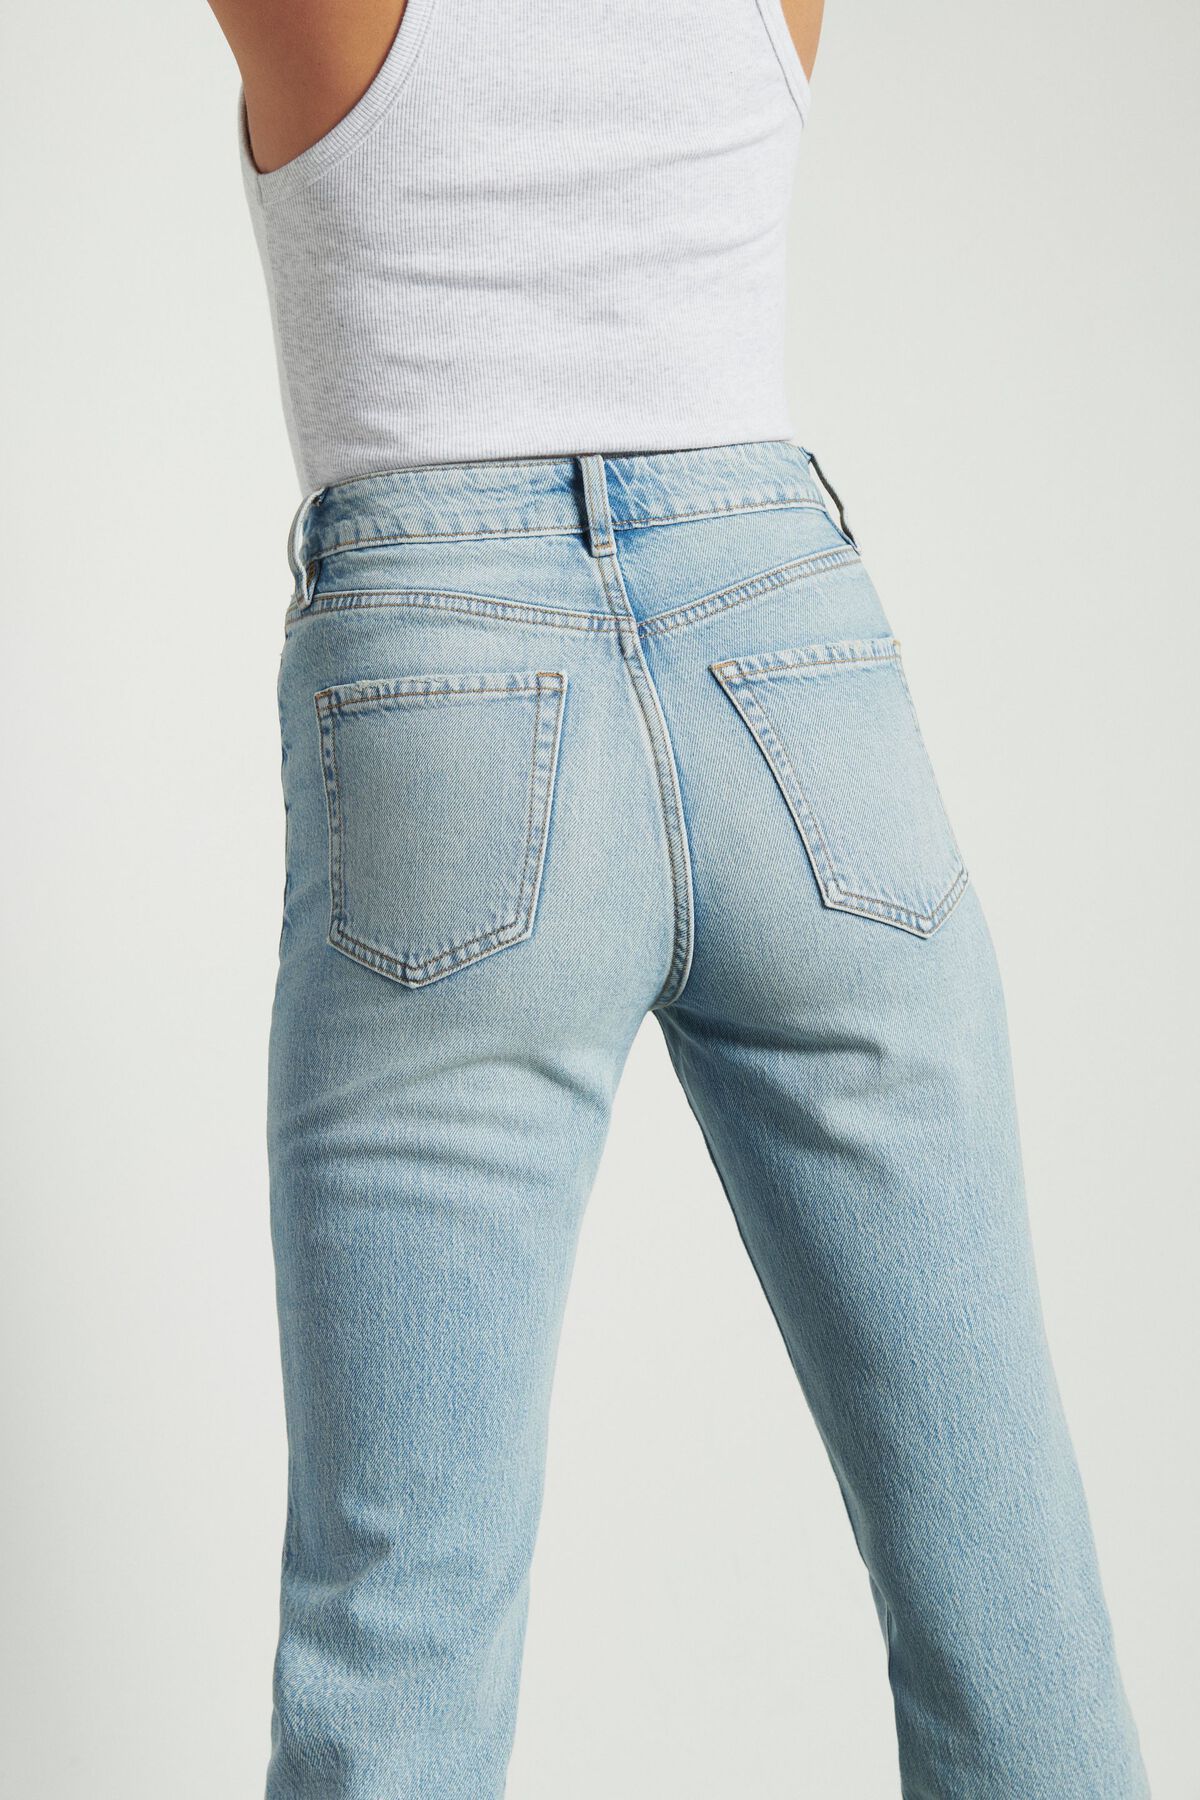 Dynamite Candice Bootcut Jeans. 4